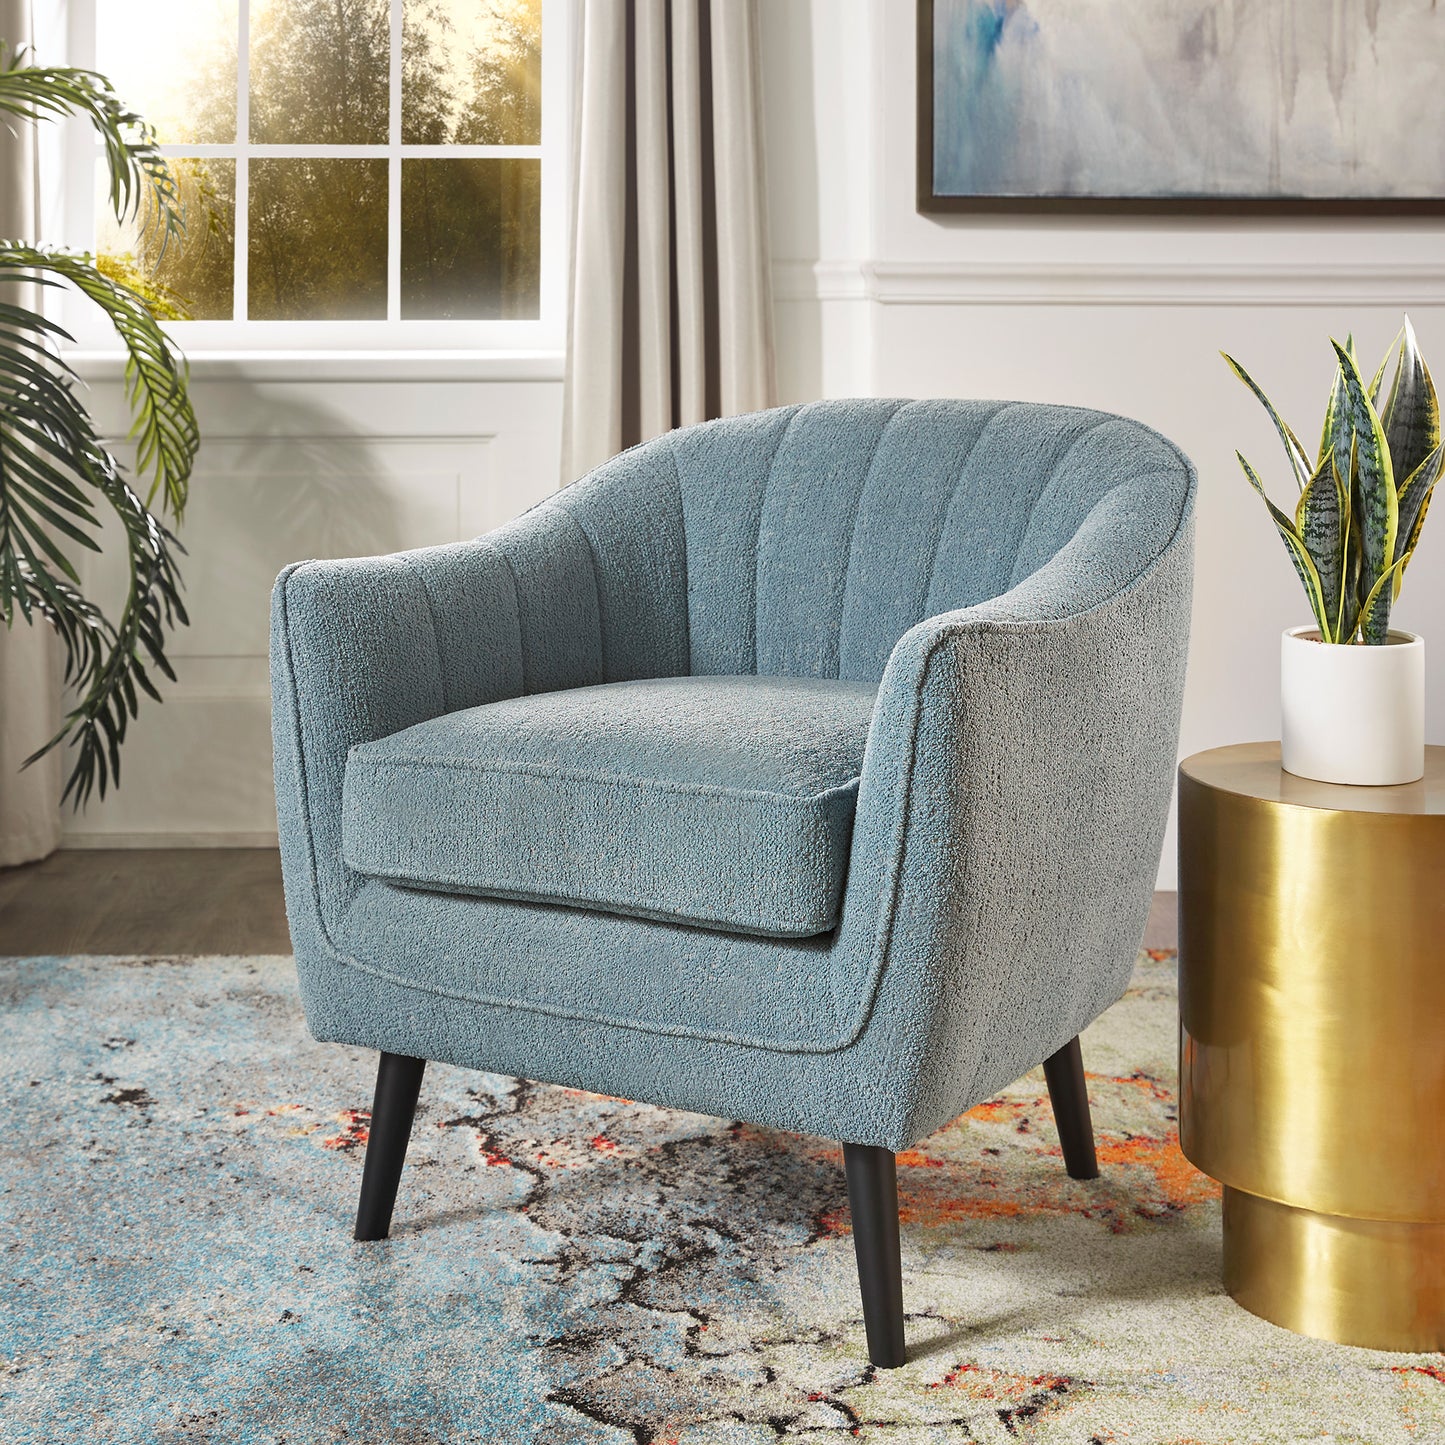 Mid-Century Modern Channel-Tufted Accent Chair with Removable Cushion Cover - Blue